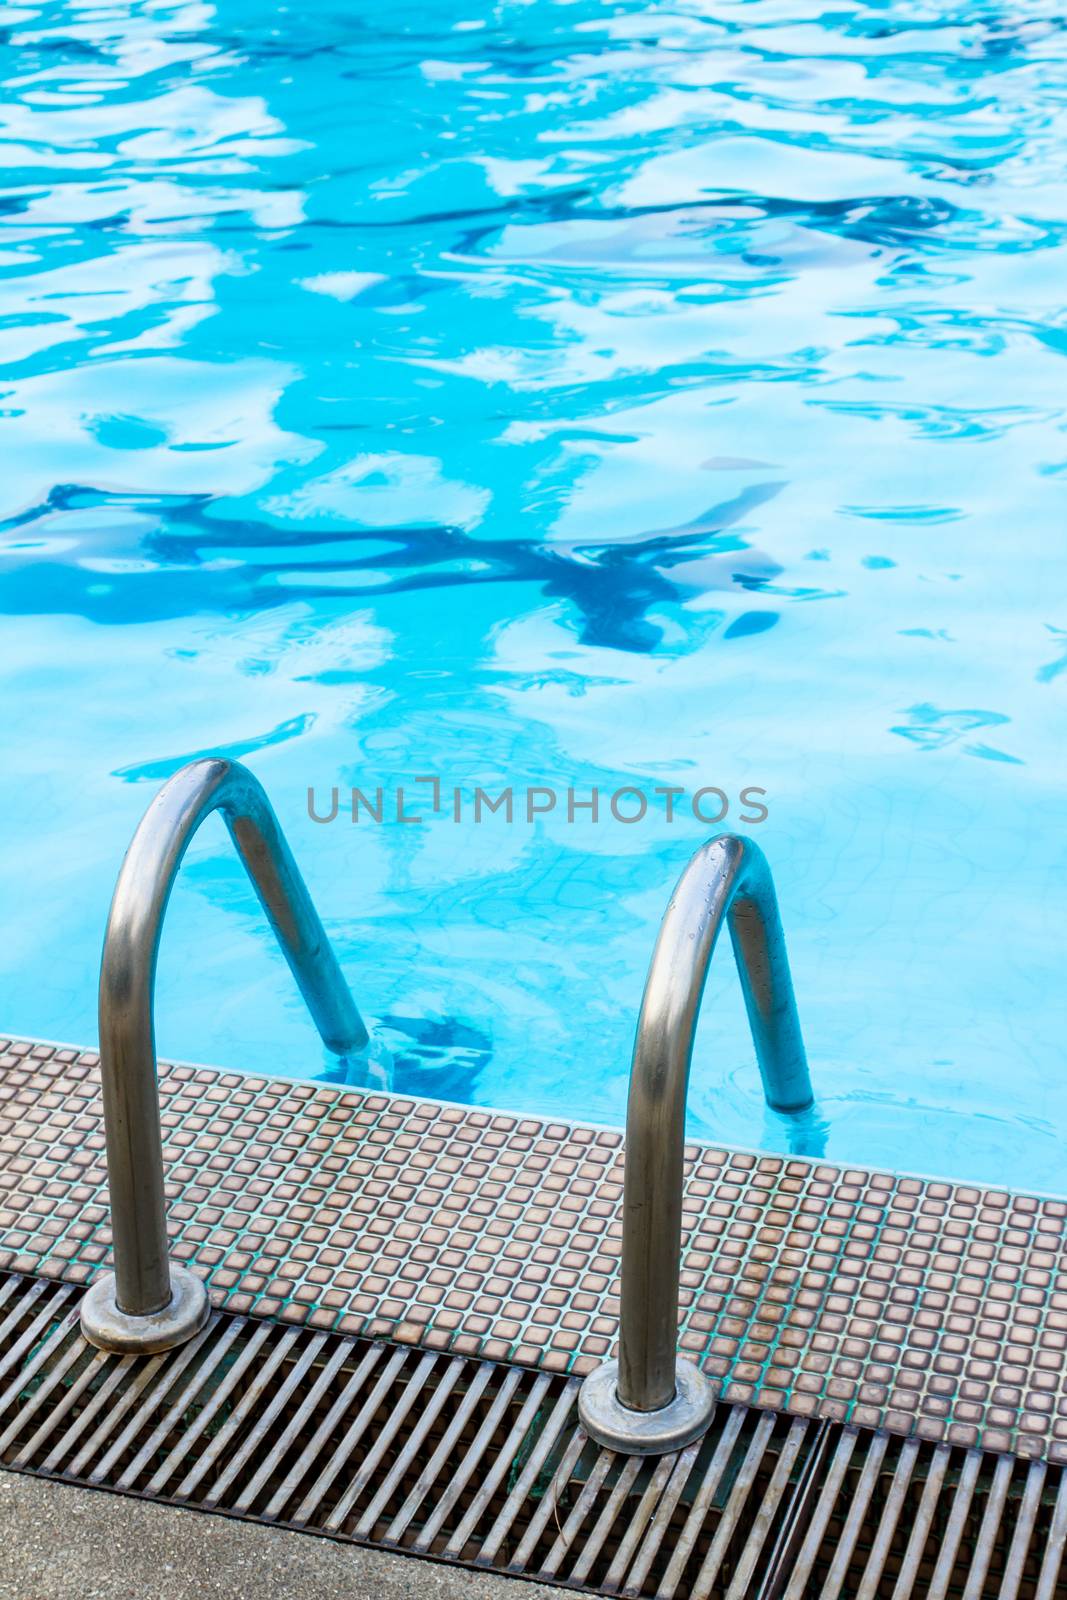 Ladder in swimming pool by kasinv